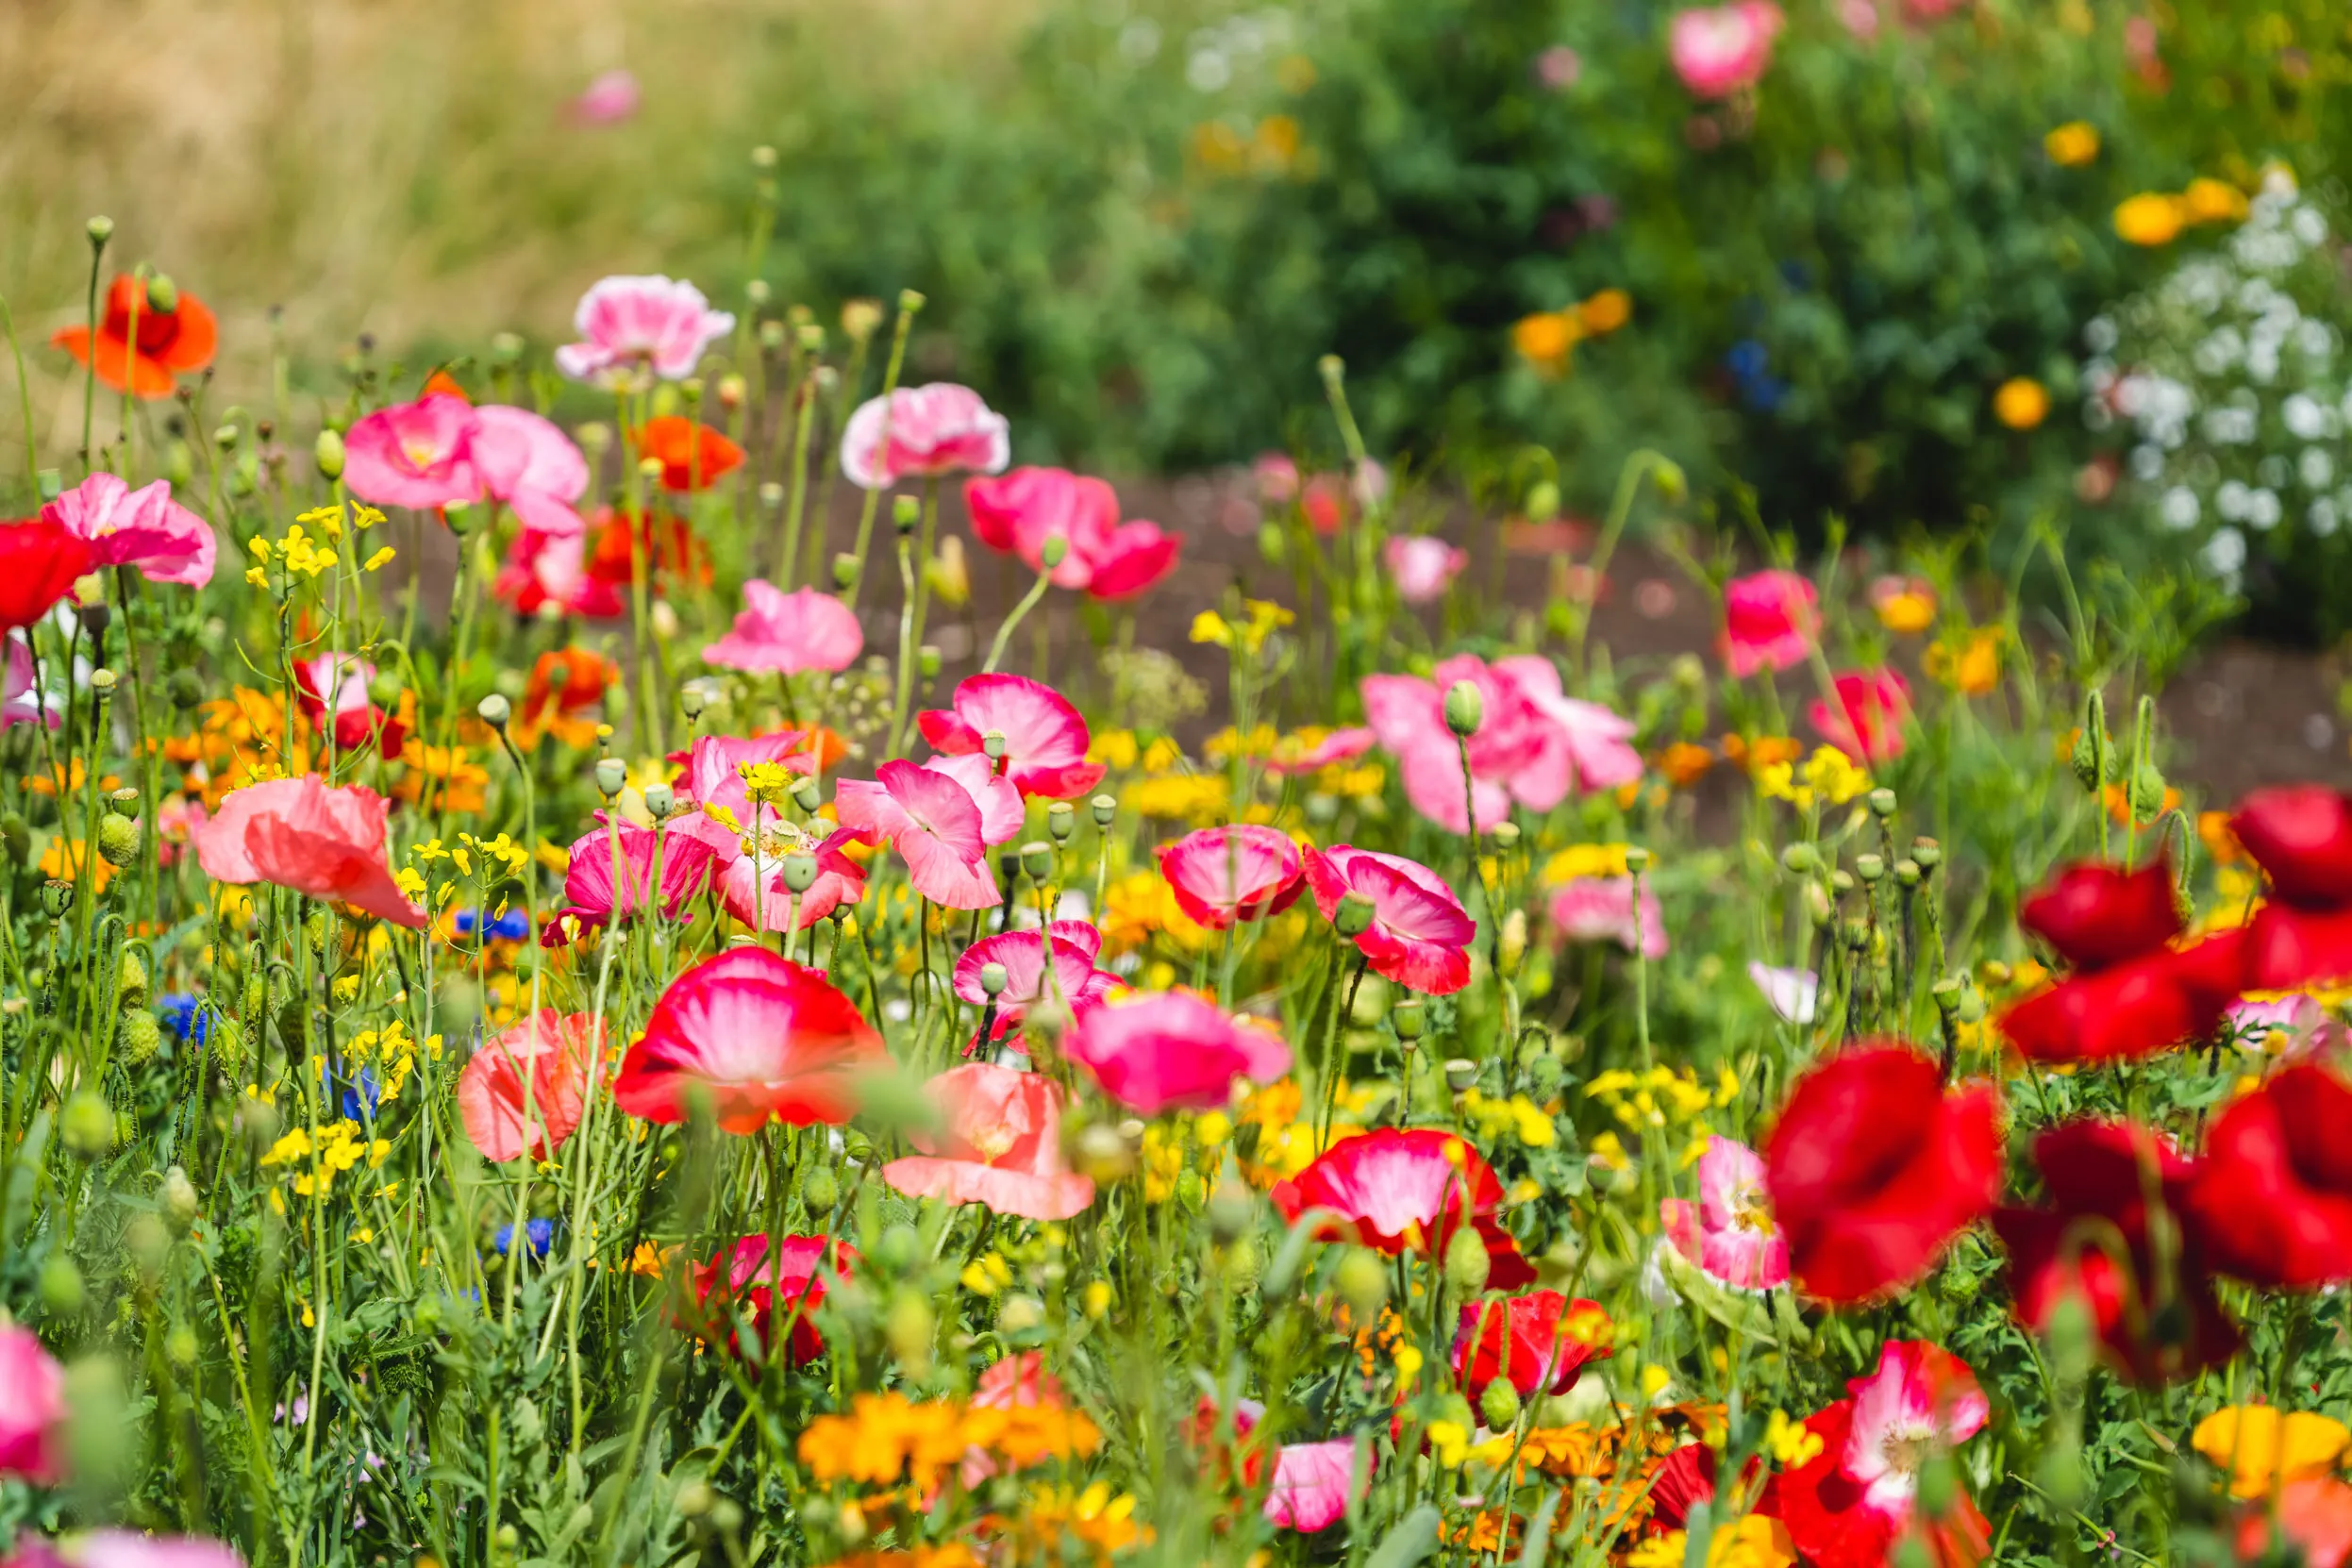 A wildflower meadow filled with a bright array of Poppies.